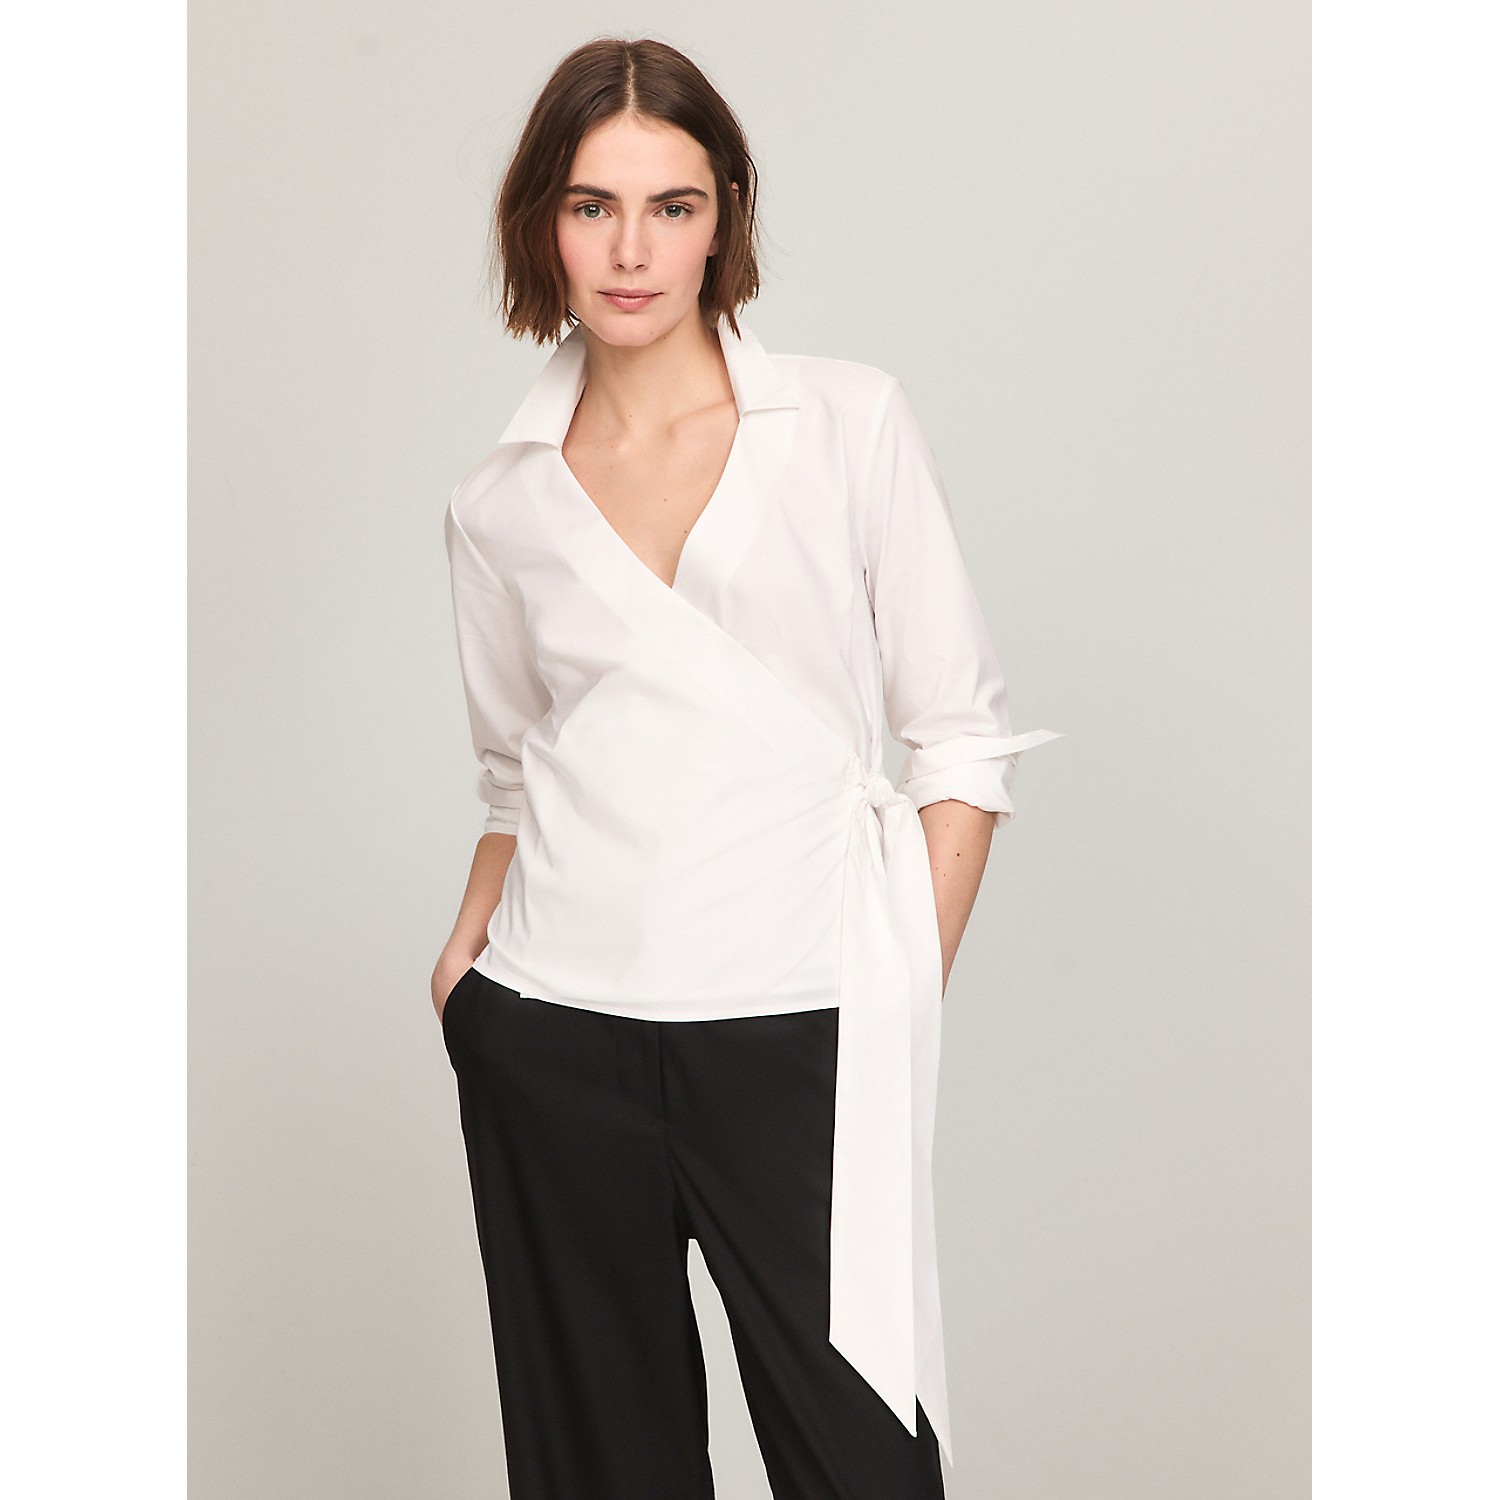 TOMMY HILFIGER Solid Stretch Cotton Wrap Top